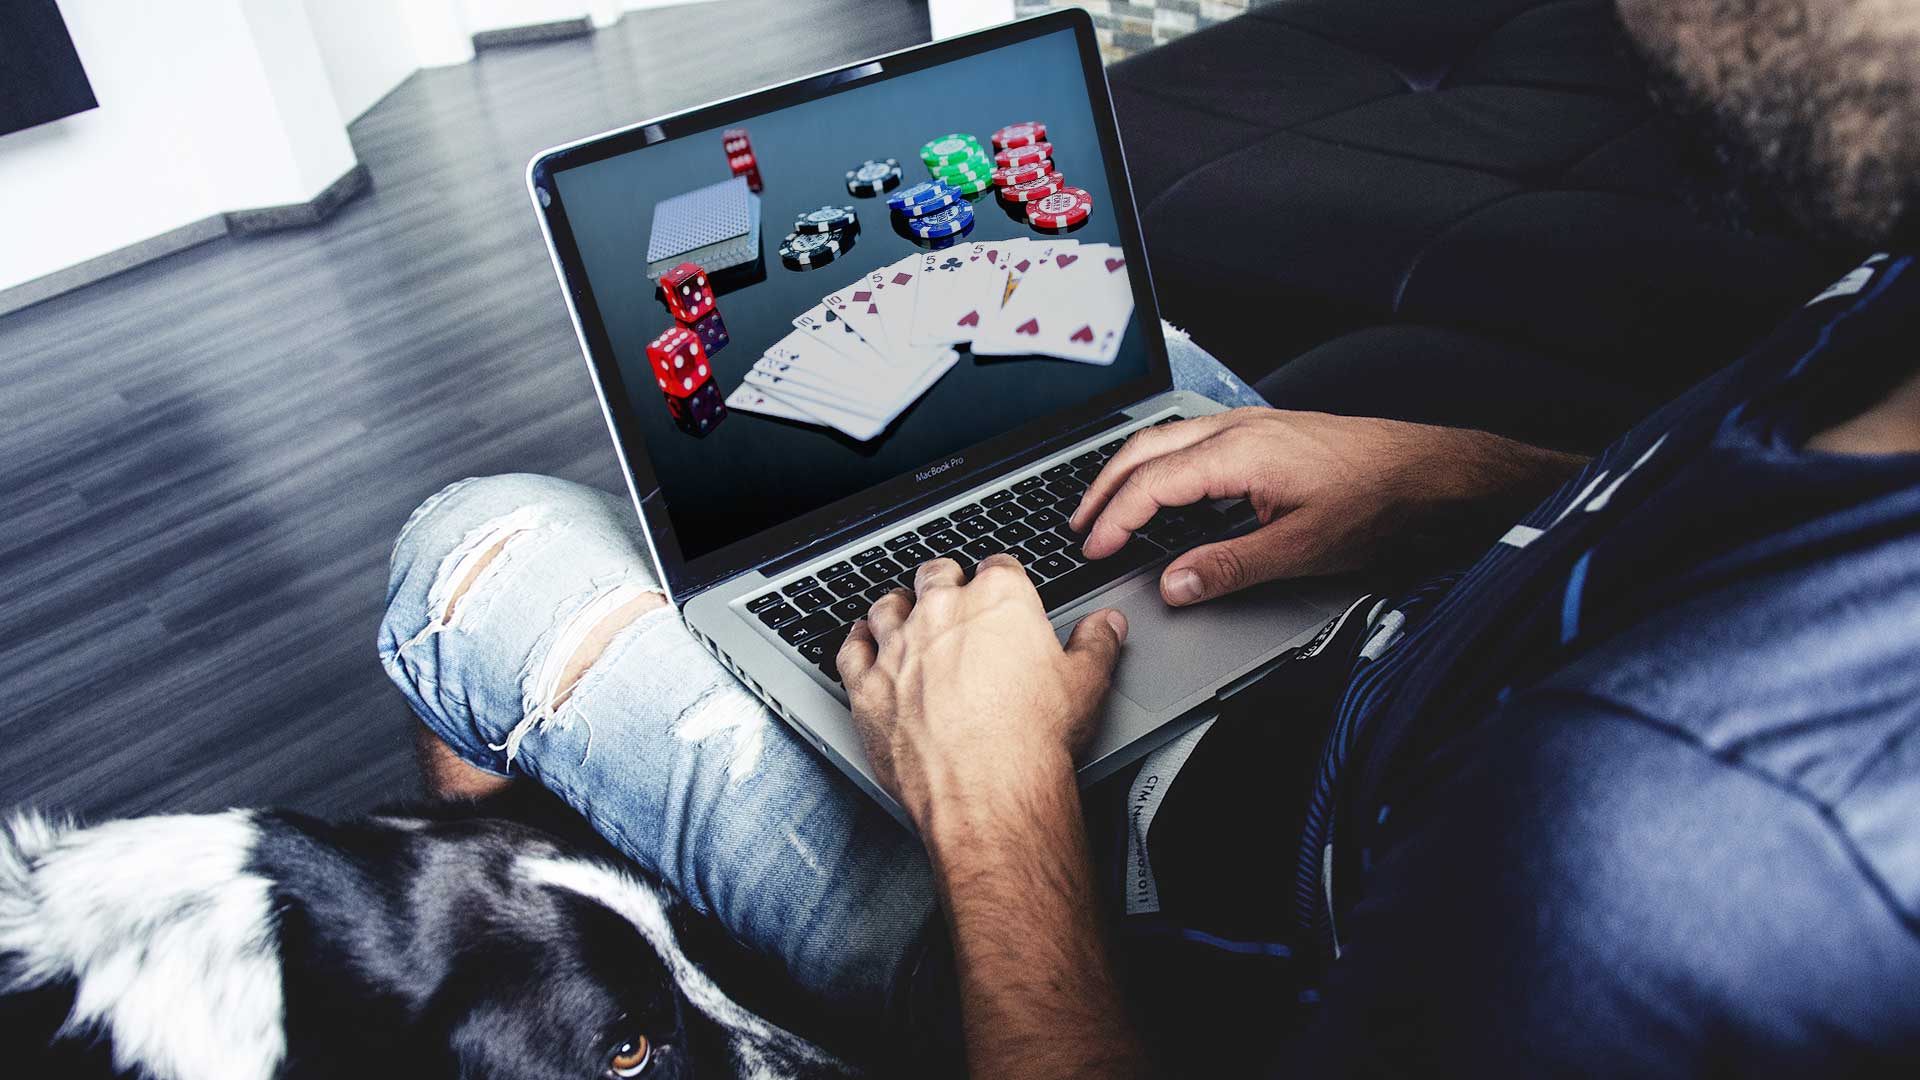 Goodgame Server Online Gambling: Your Path to Riches